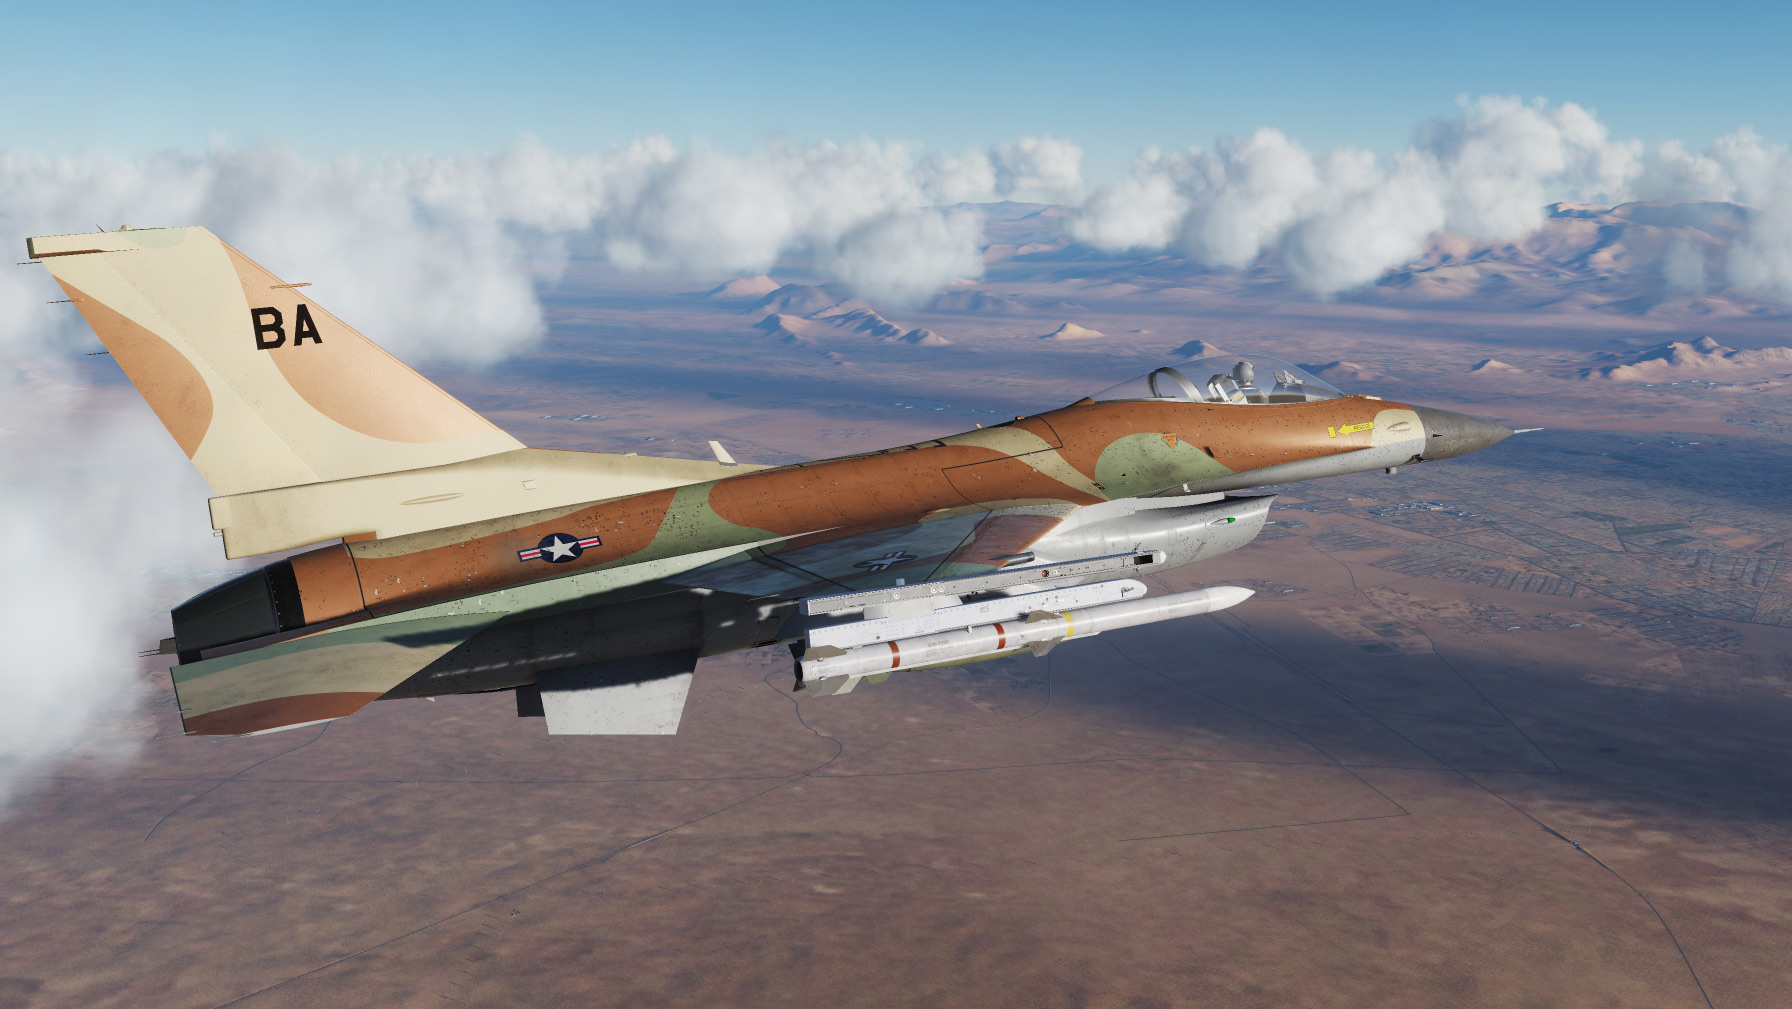 Iron Eagle F-16 - skin as seen on Chappy's and Doug's F-16